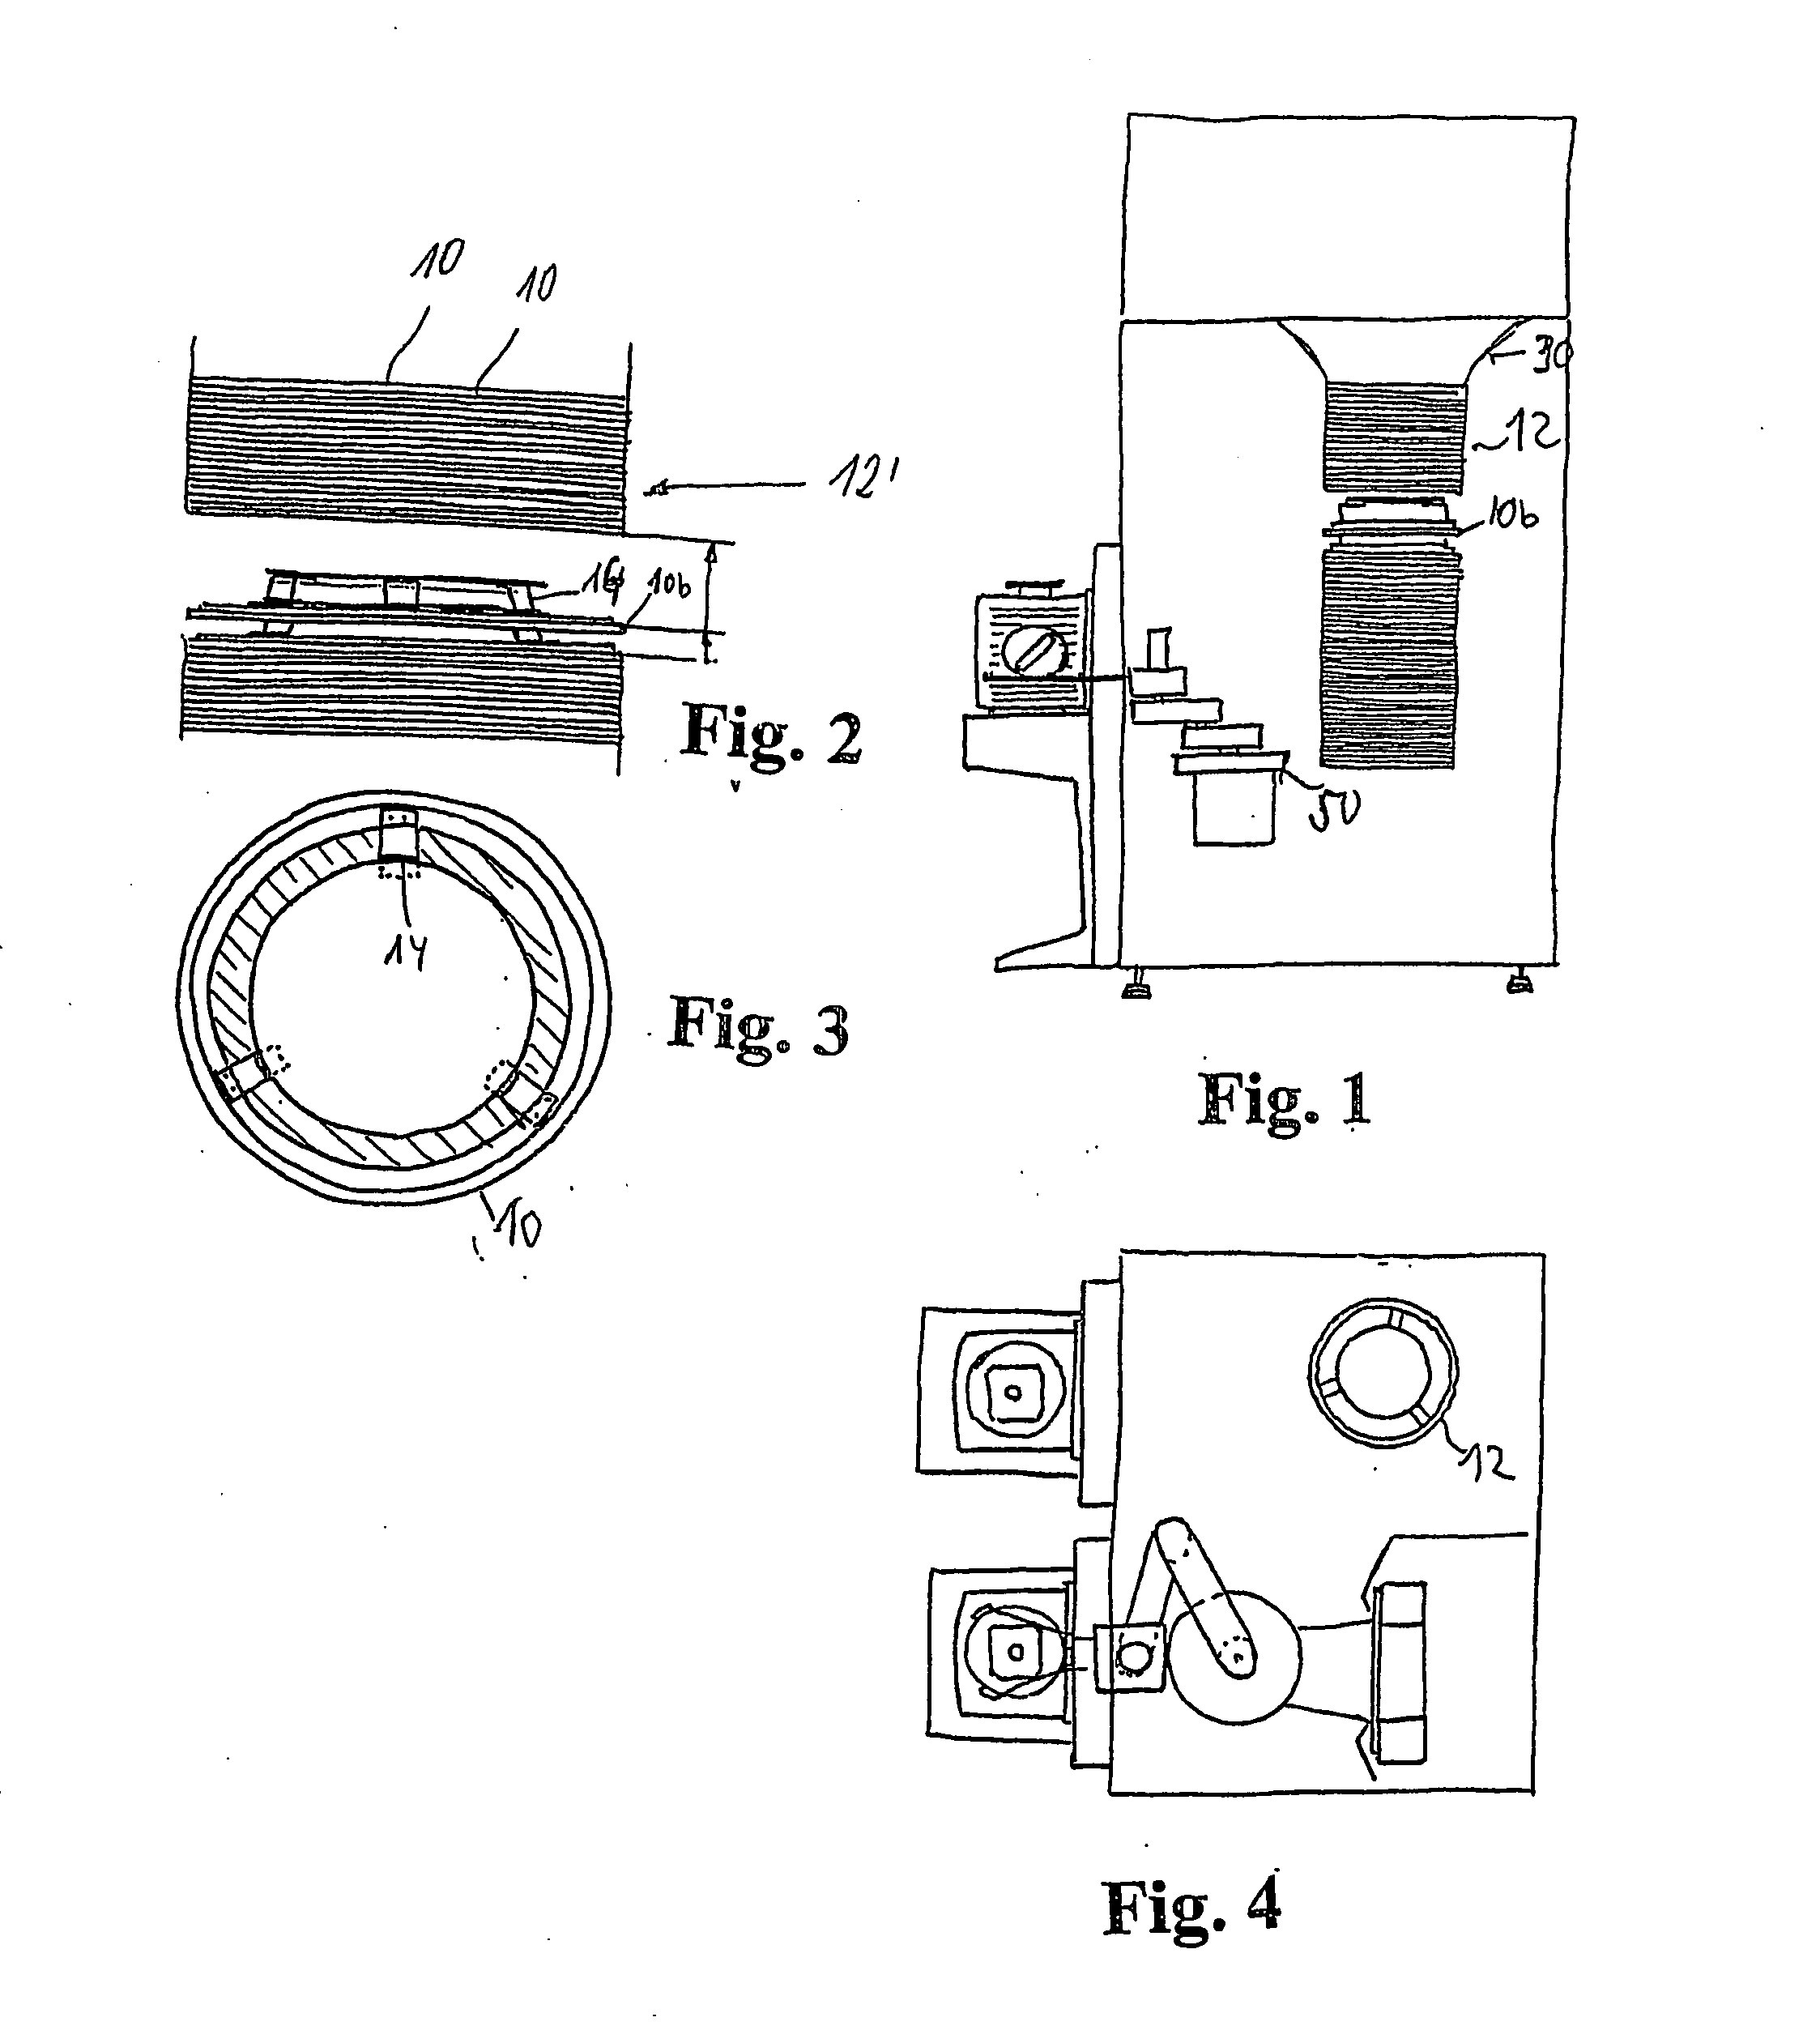 Device for storing and/or transporting plate-shaped substrates in the manufacture of electronic components